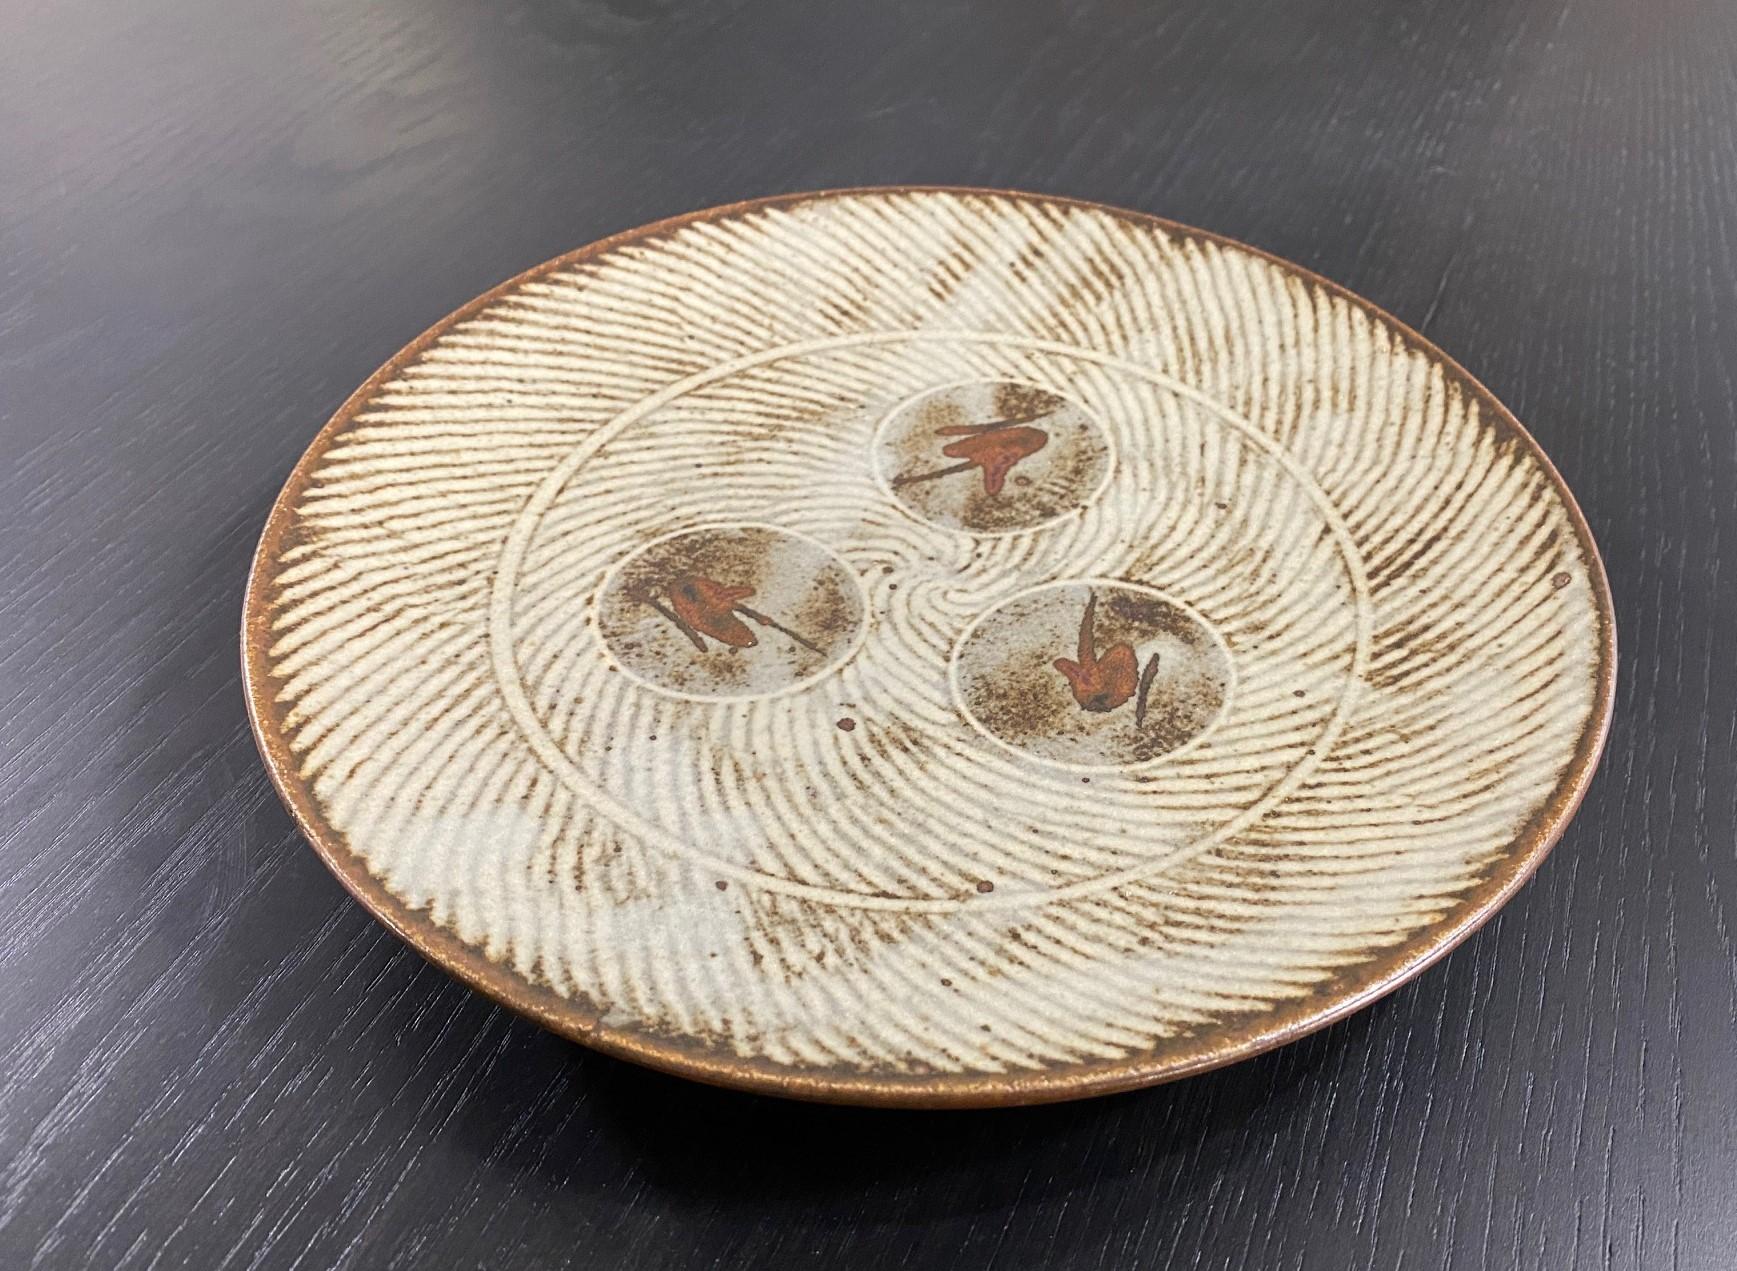 An exquisitely decorated and wonderfully executed ceramic Mingei glazed plate/ low bowl by Japanese National Treasure and Mashiko pottery master Tatsuzo Shimaoka. This work displays his famous Jomon Zogan rope inlay design, hand-painted decoration,